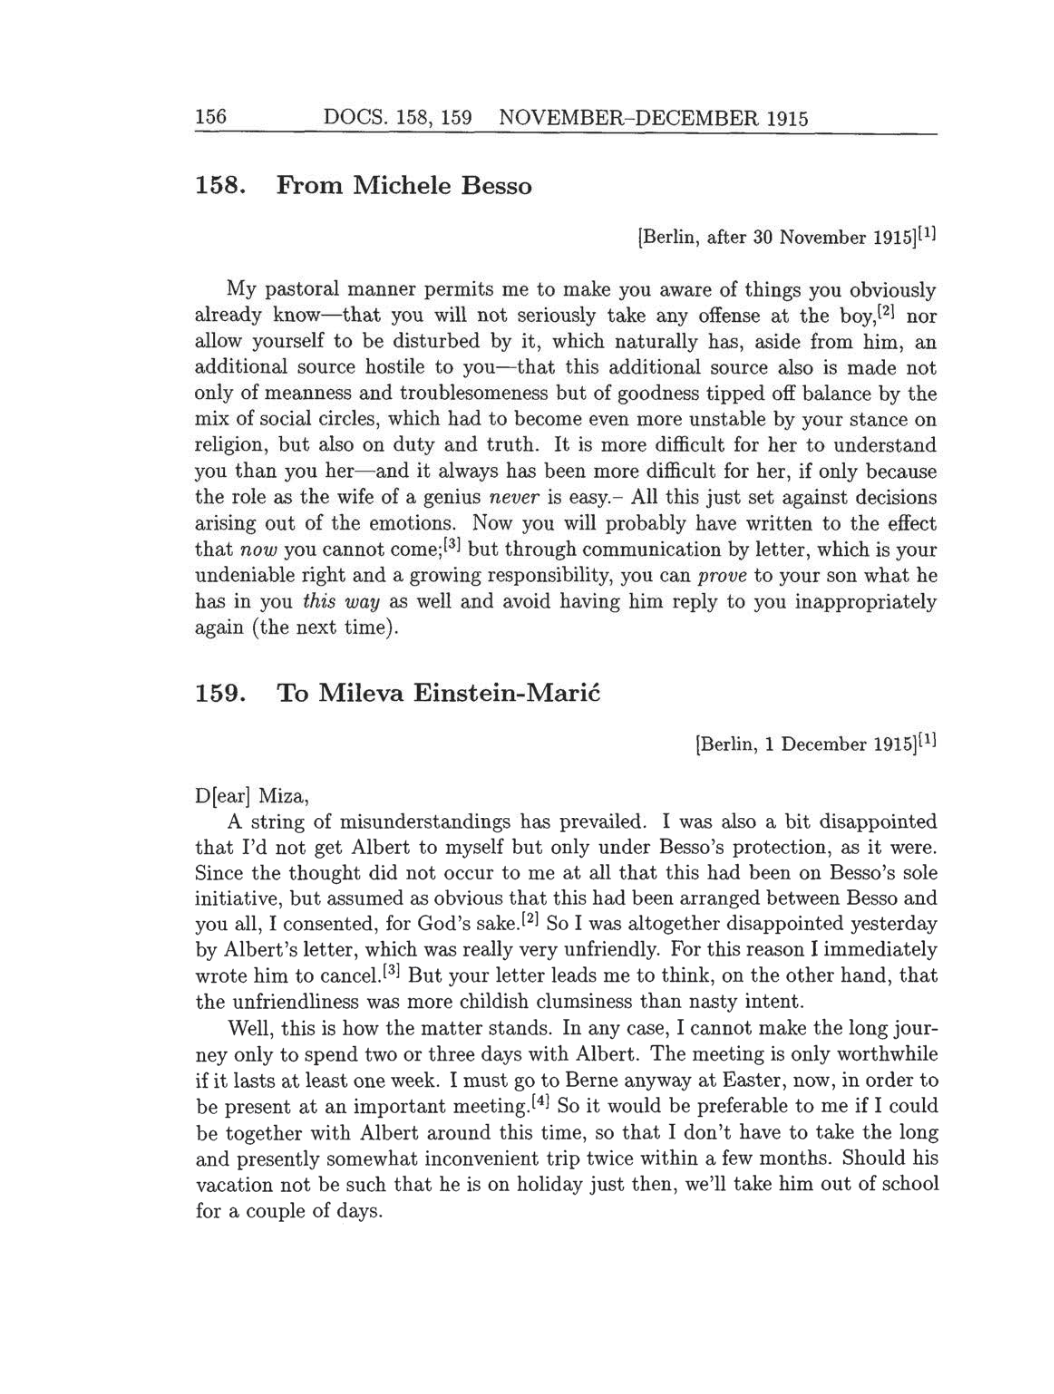 Volume 8: The Berlin Years: Correspondence, 1914-1918 (English translation supplement) page 156